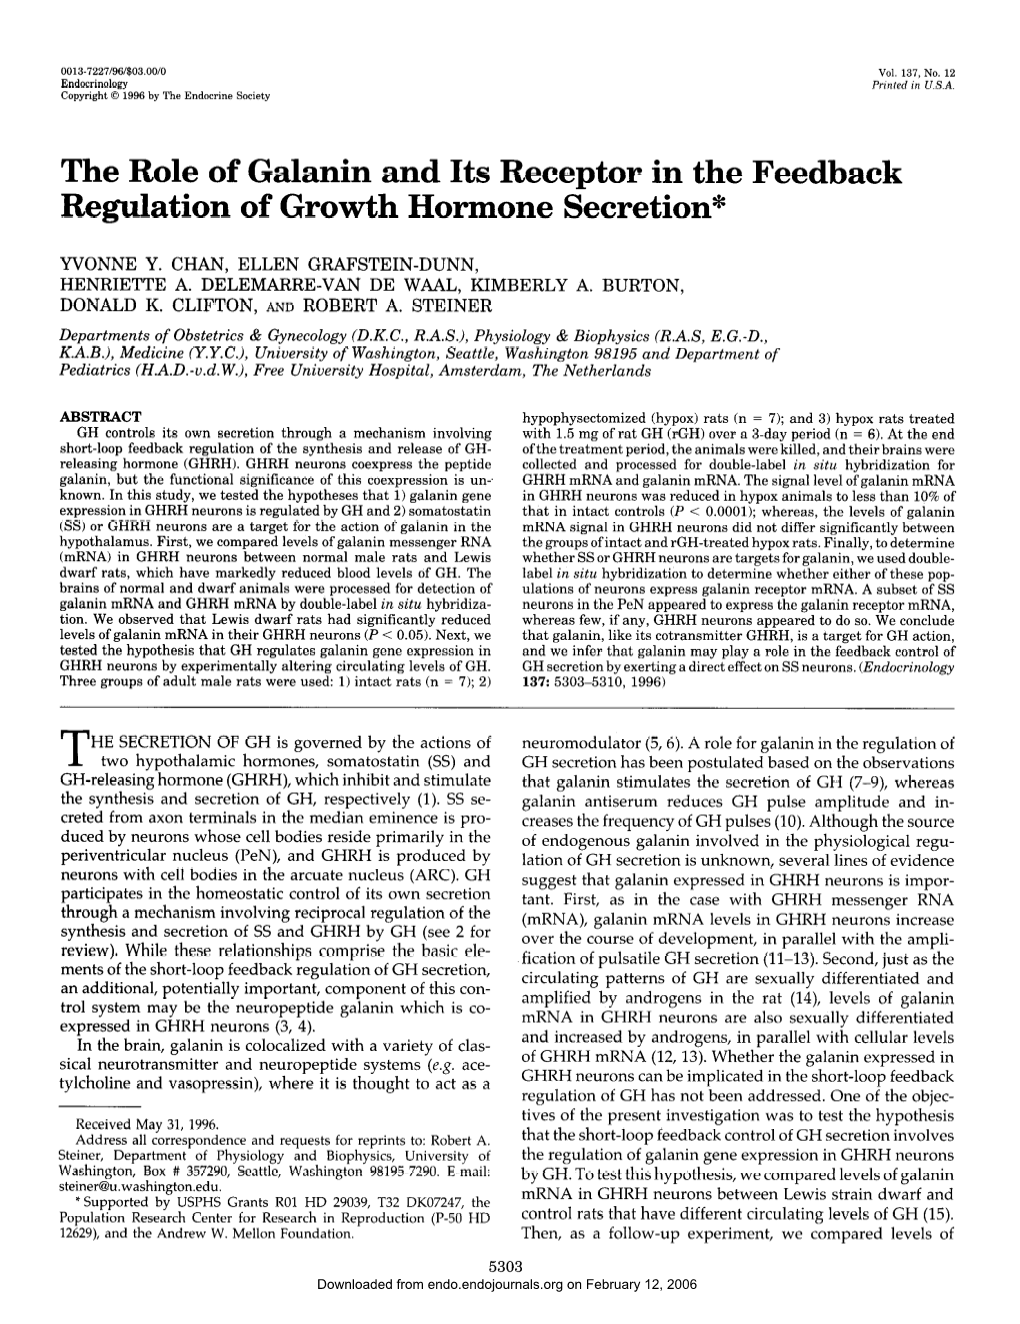 The Role of Galanin and Its Receptor in the Feedback Regulation of Growth Hormone Secretion*